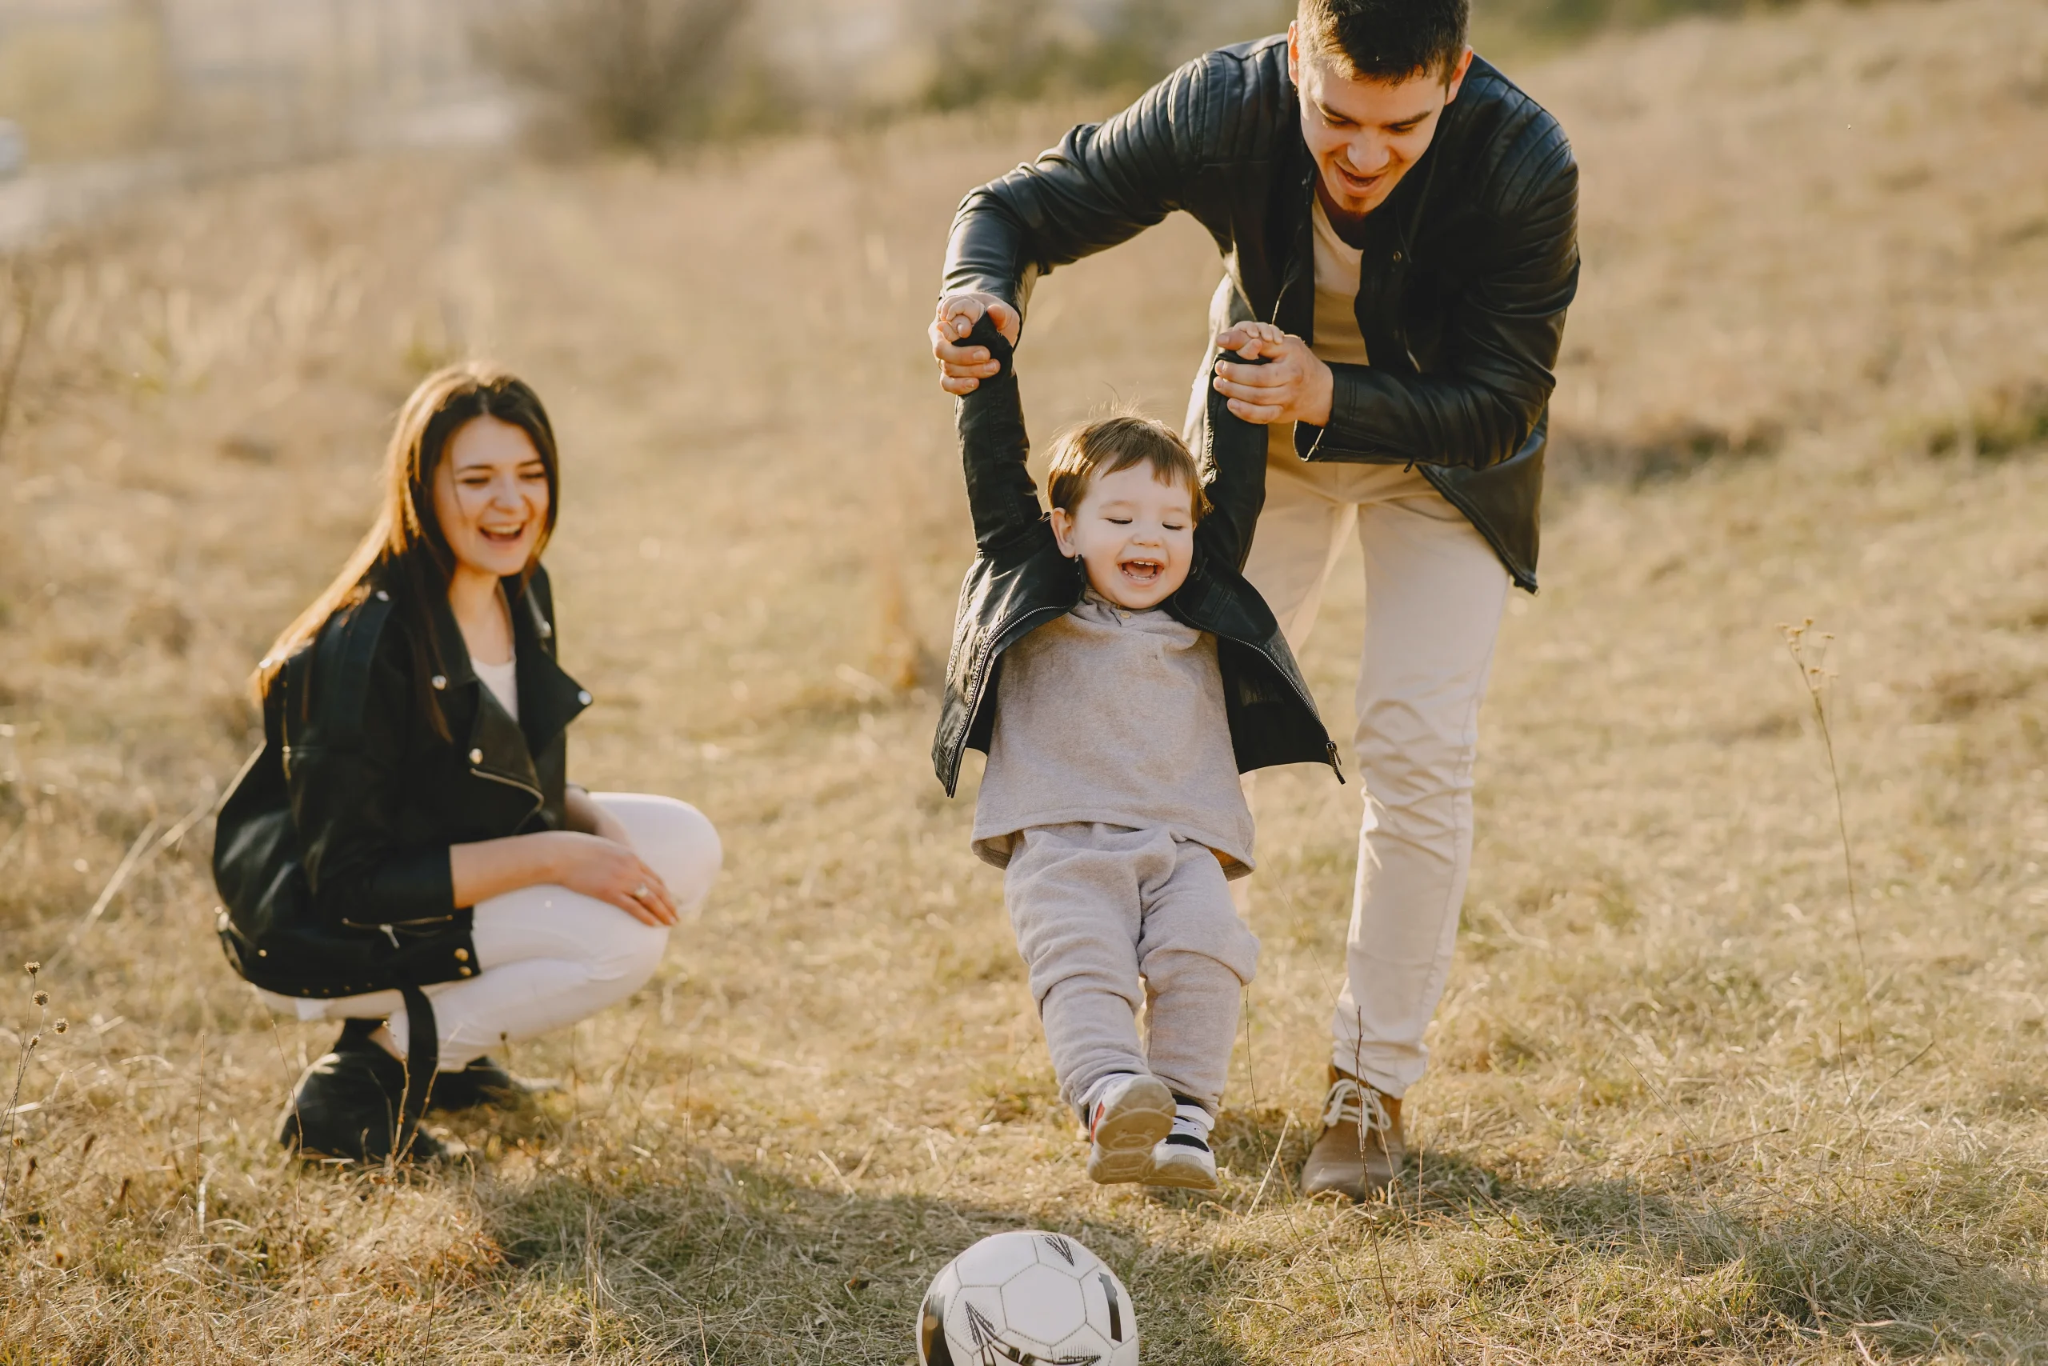 Family enjoying outdoor time together with a focus on a child taking first steps toward a soccer ball.